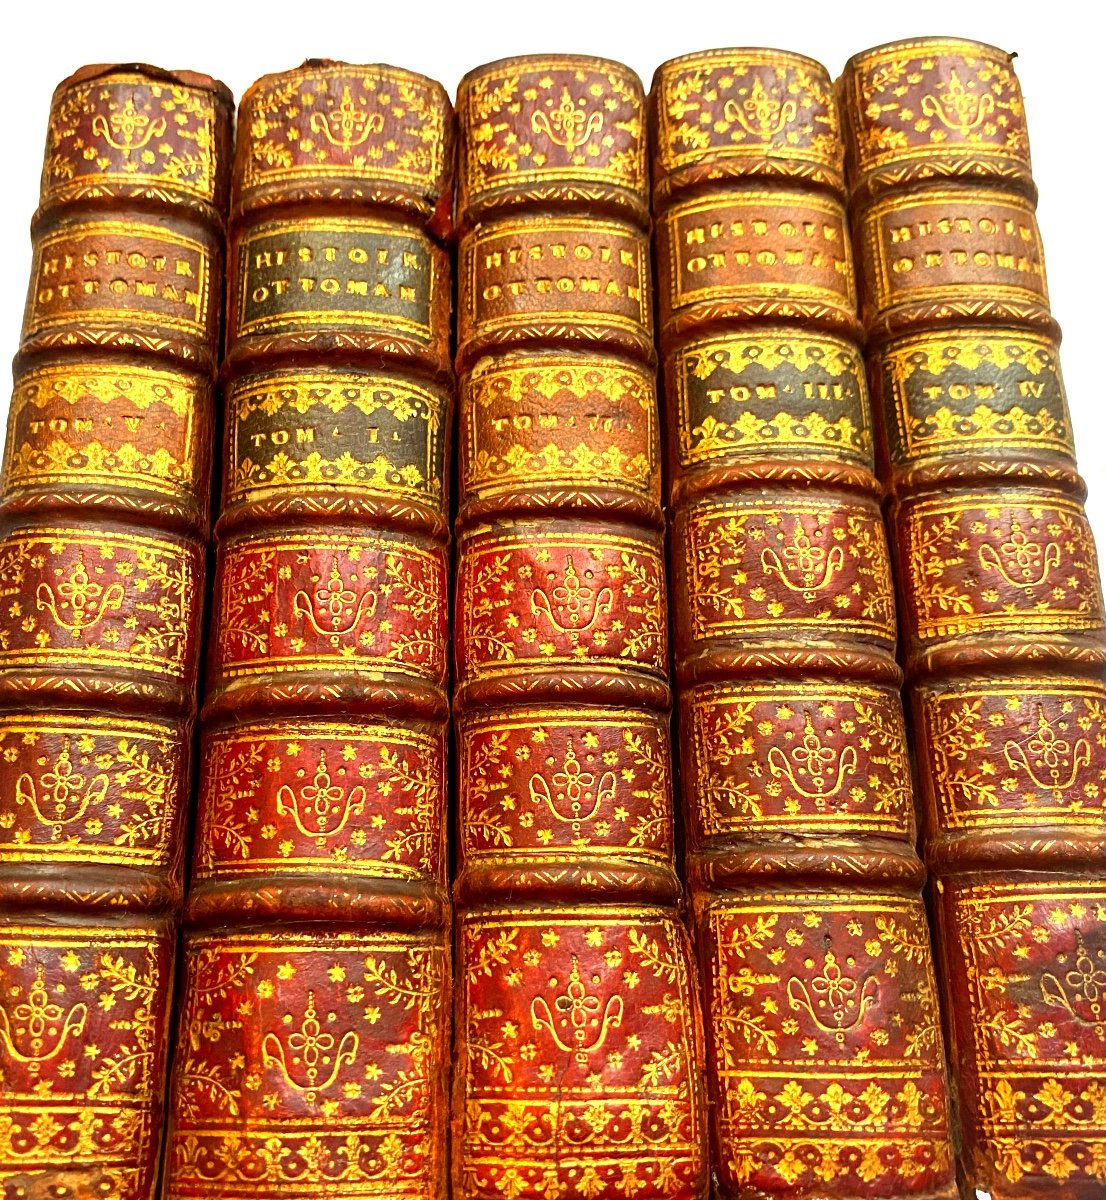 In A Rich Red Morocco Spine Binding "history Of The Ottoman Empire" By Sagrédo 1724.-photo-6